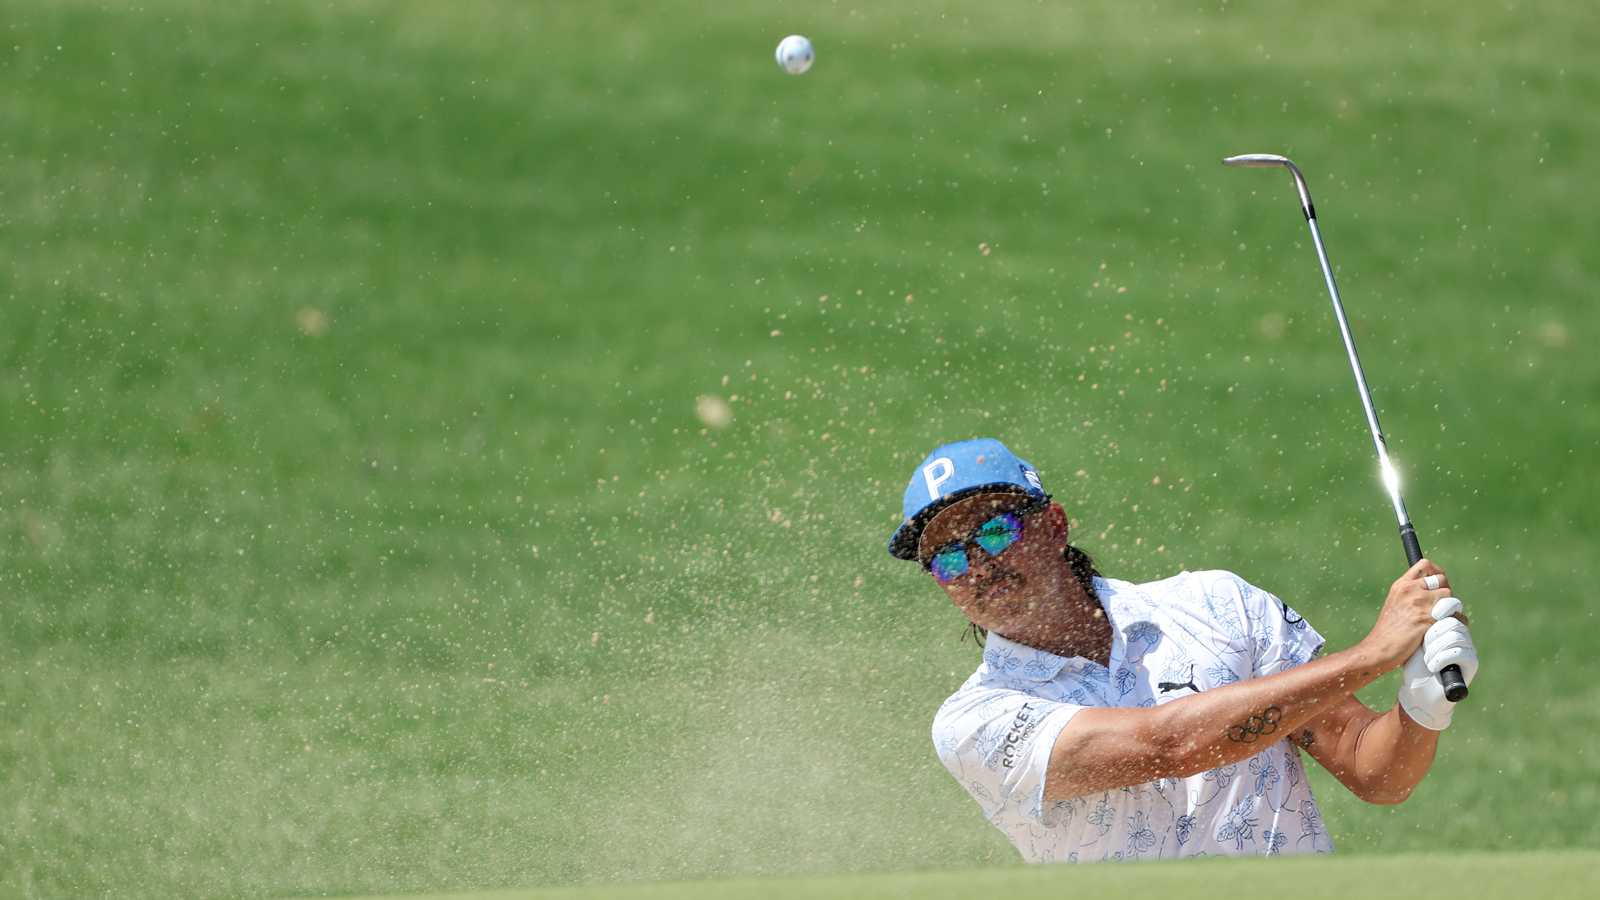 Rickie Fowler of the United States plays a shot from a bunker on the eighth hole during the first round of the 2022 PGA Championship. (Photo by Christian Petersen/Getty Images)